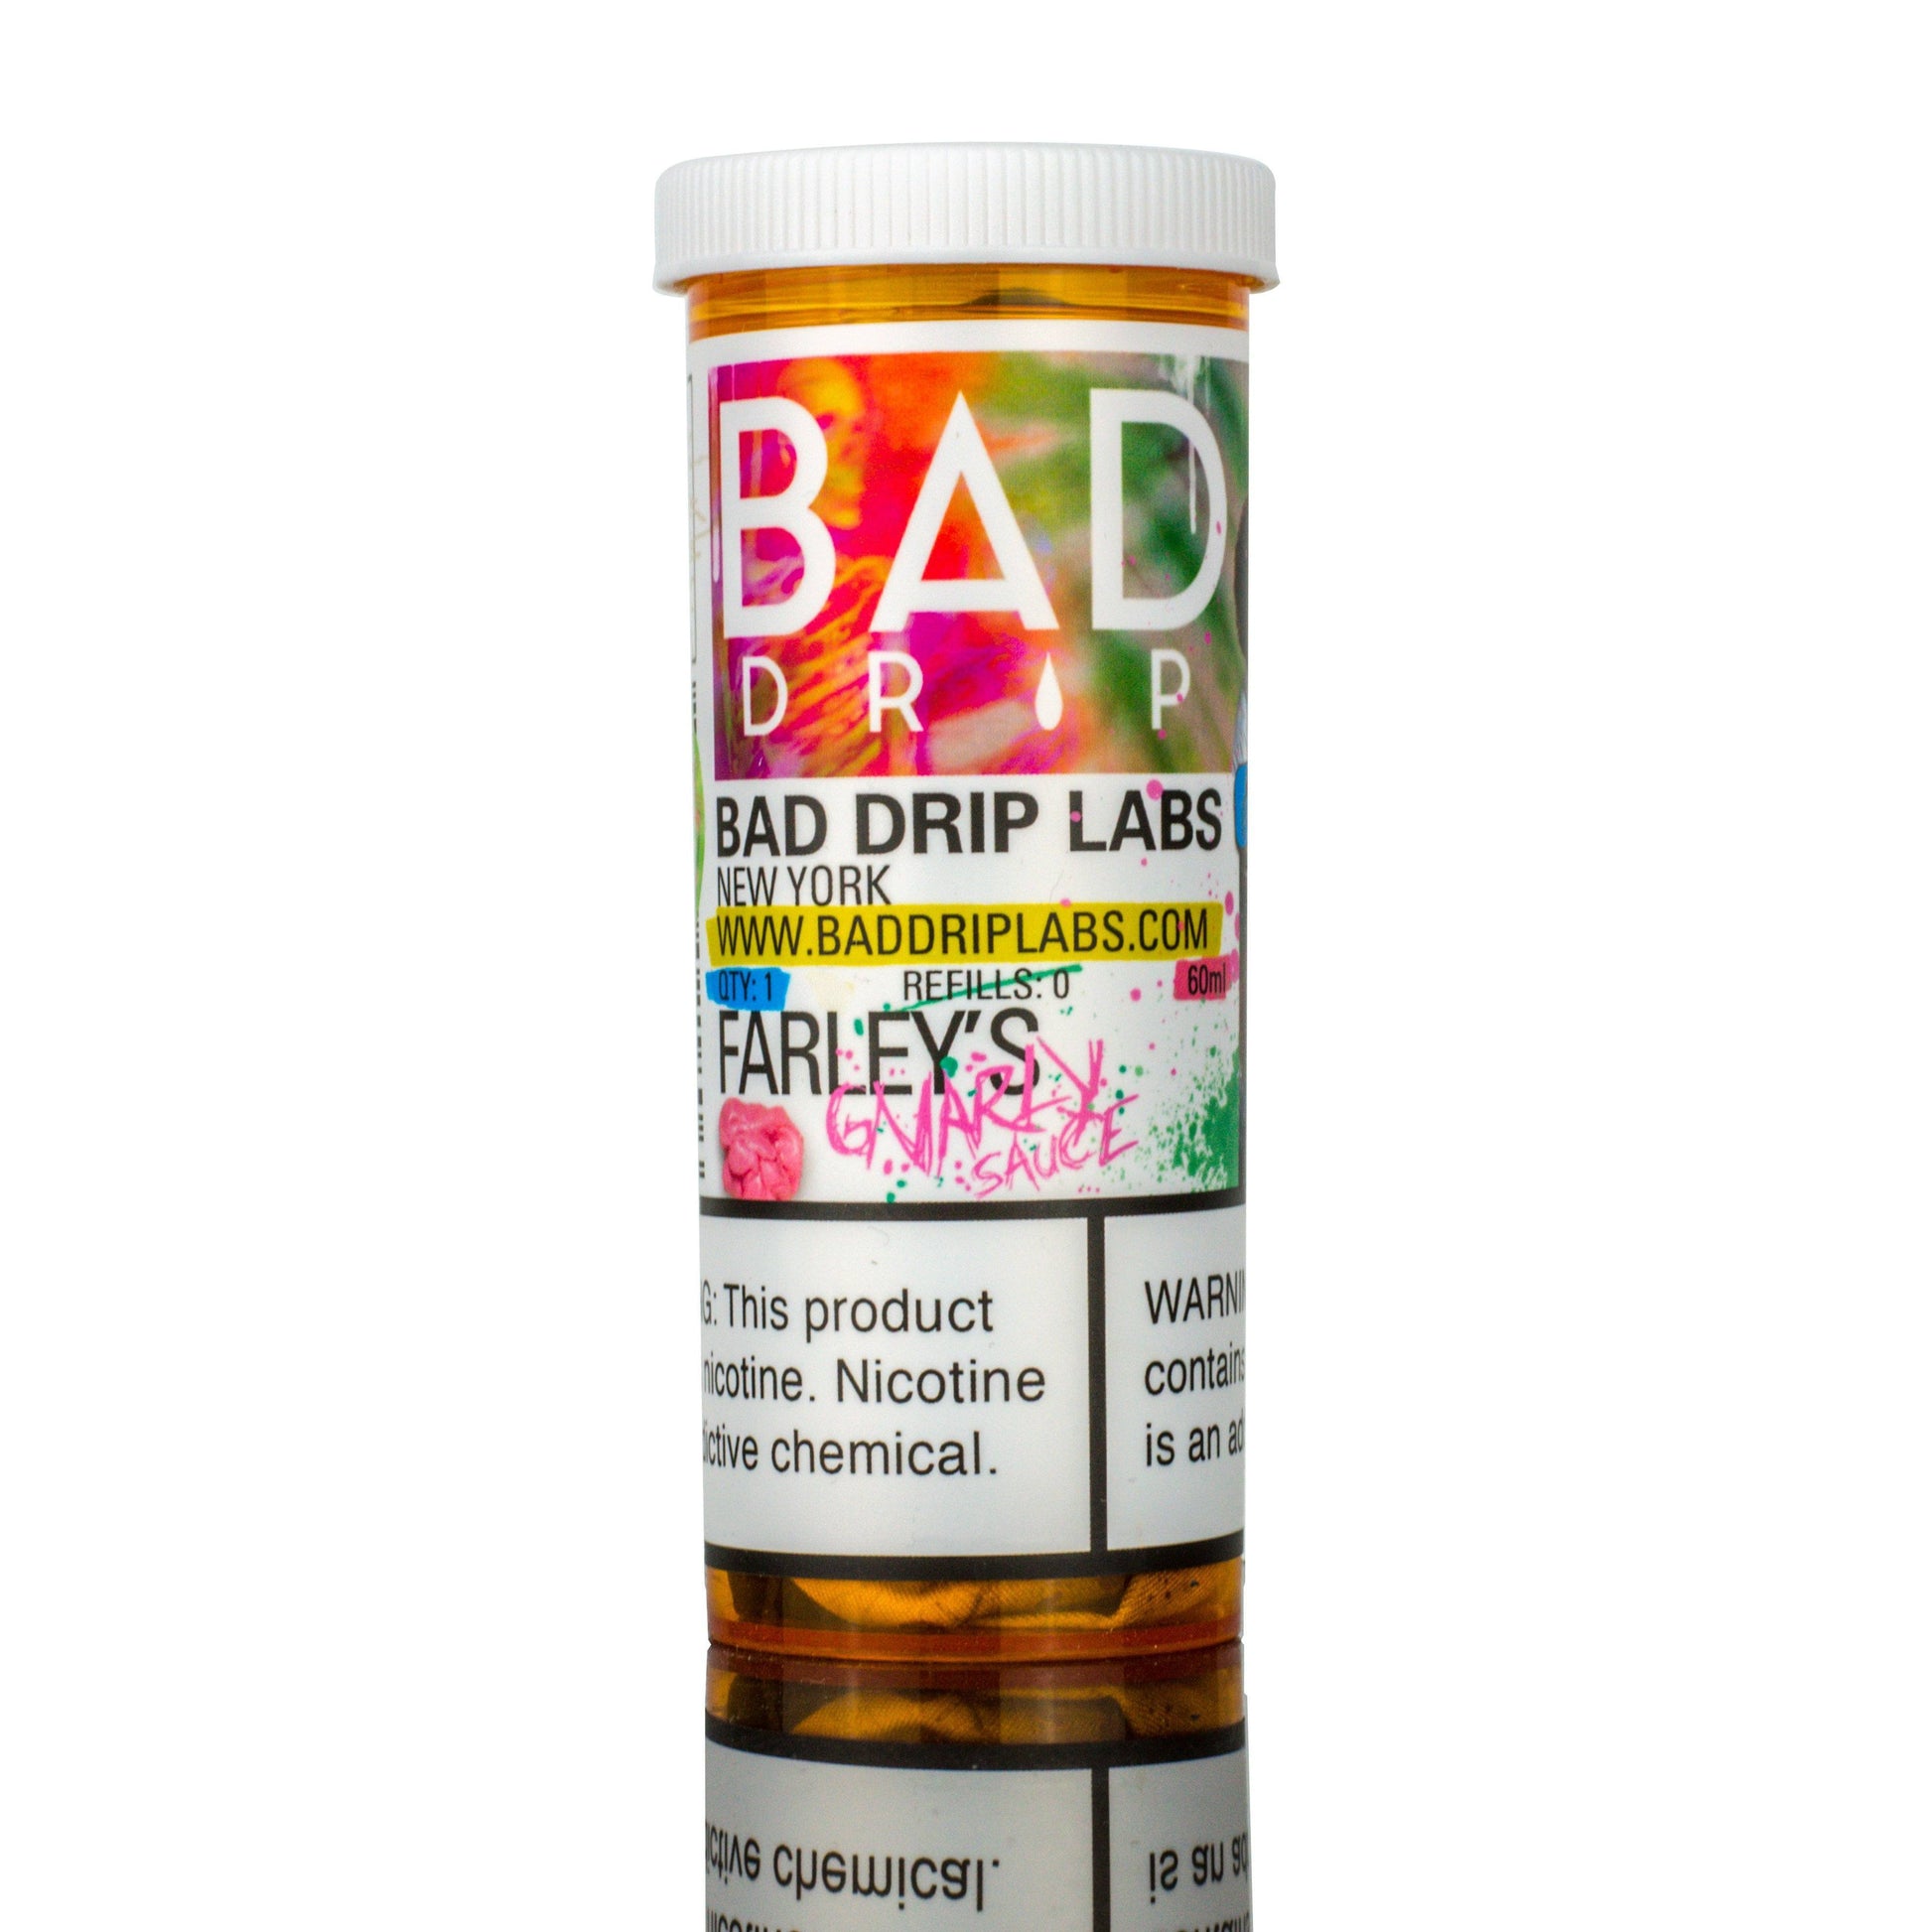 Farley's Gnarly Sauce by Bad Drip Series (60mL) Bottle